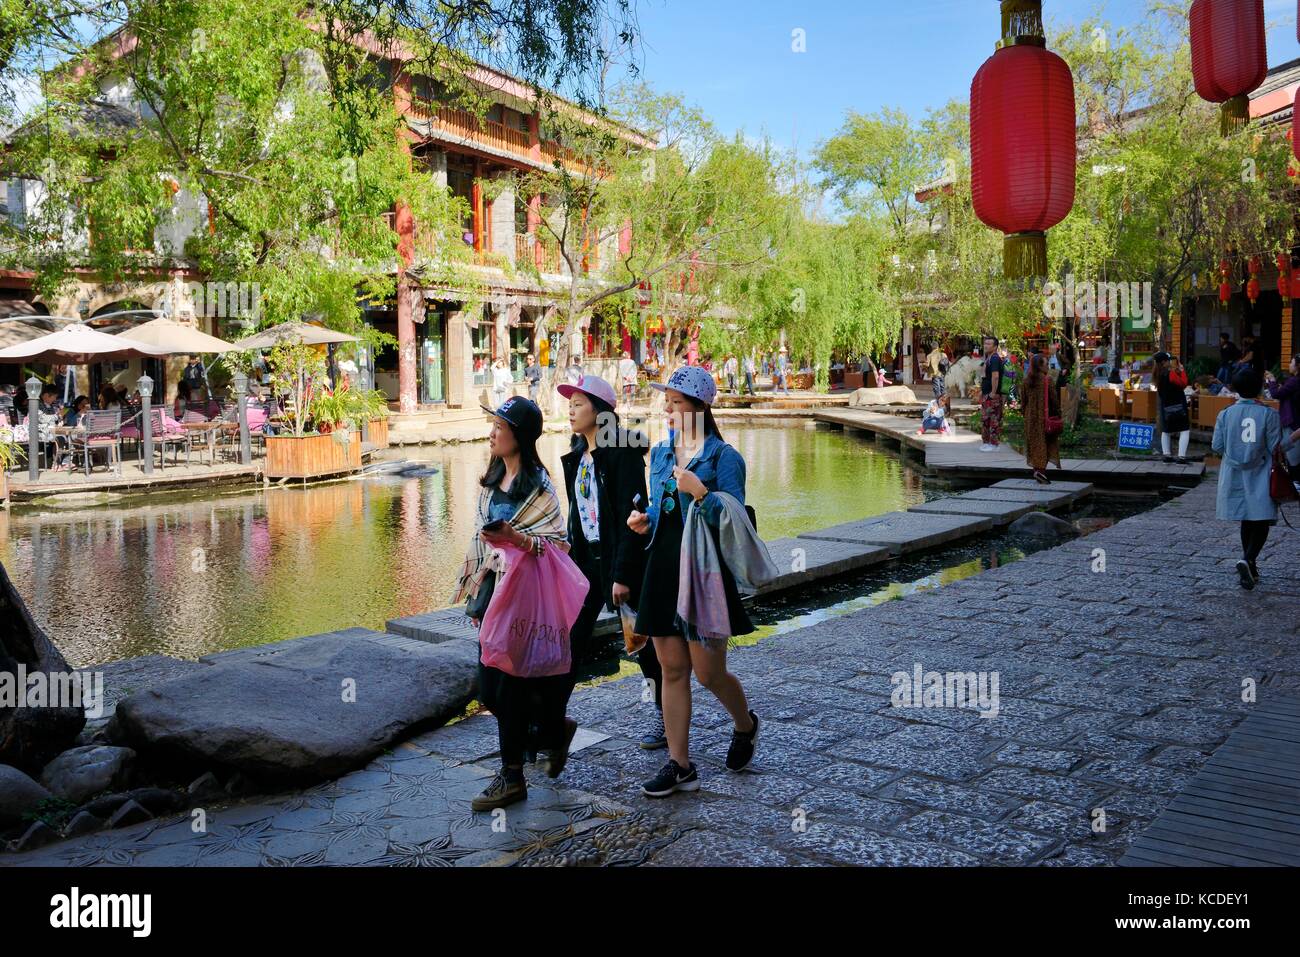 Shuhe Old Town World Heritage Site, Yunnan Province, China. Naxi ethnic people ancient site at Lijiang. Tea rooms and souvenir shops street scene Stock Photo